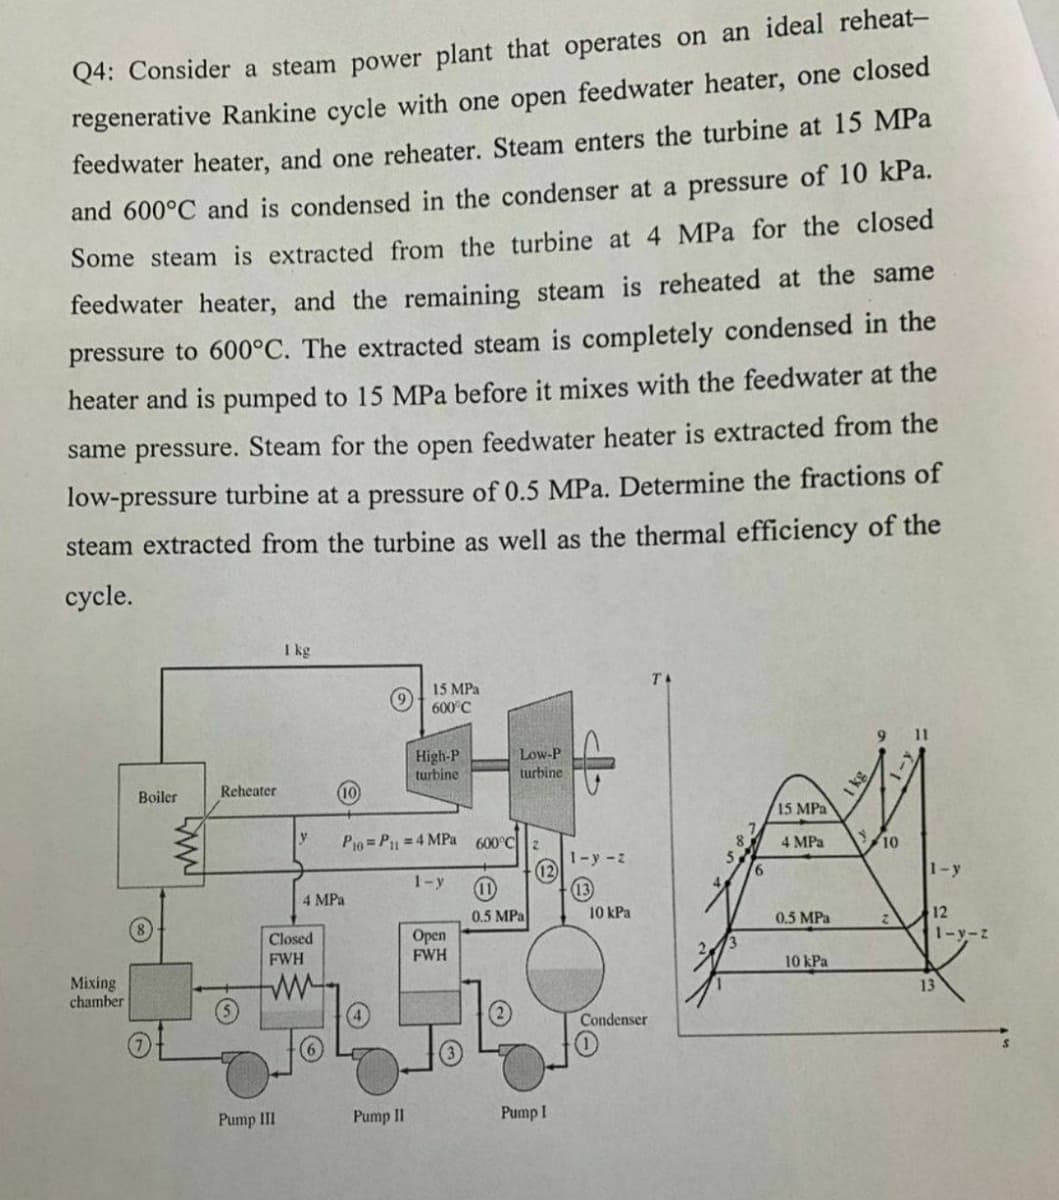 Q4: Consider a steam power plant that operates on an ideal reheat-
regenerative Rankine cycle with one open feedwater heater, one closed
feedwater heater, and one reheater. Steam enters the turbine at 15 MPa
the condenser at a pressure of 10 kPa.
and 600°C and is condensed
Some steam is extracted from the turbine at 4 MPa for the closed
feedwater heater, and the remaining steam is reheated at the same
pressure to 600°C. The extracted steam is completely condensed in the
heater and is pumped to 15 MPa before it mixes with the feedwater at the
same pressure. Steam for the open feedwater heater is extracted from the
low-pressure turbine at a pressure of 0.5 MPa. Determine the fractions of
steam extracted from the turbine as well as the thermal efficiency of the
сycle.
I kg
15 MPa
TA
600°C
11
High-P
turbine
Low-P
turbine
Boiler
Reheater
10
15 MPa
Po= P =4 MPa 600°C2
4 MPa
10
1-y -z
12
1-y
6.
1-y
4 MPa
0.5 MPa
10 kPa
0.5 MPa
12
Оpen
FWH
Closed
1-y-z
FWH
10 kPa
Mixing
chamber
13
Condenser
Pump III
Pump II
Pump I
